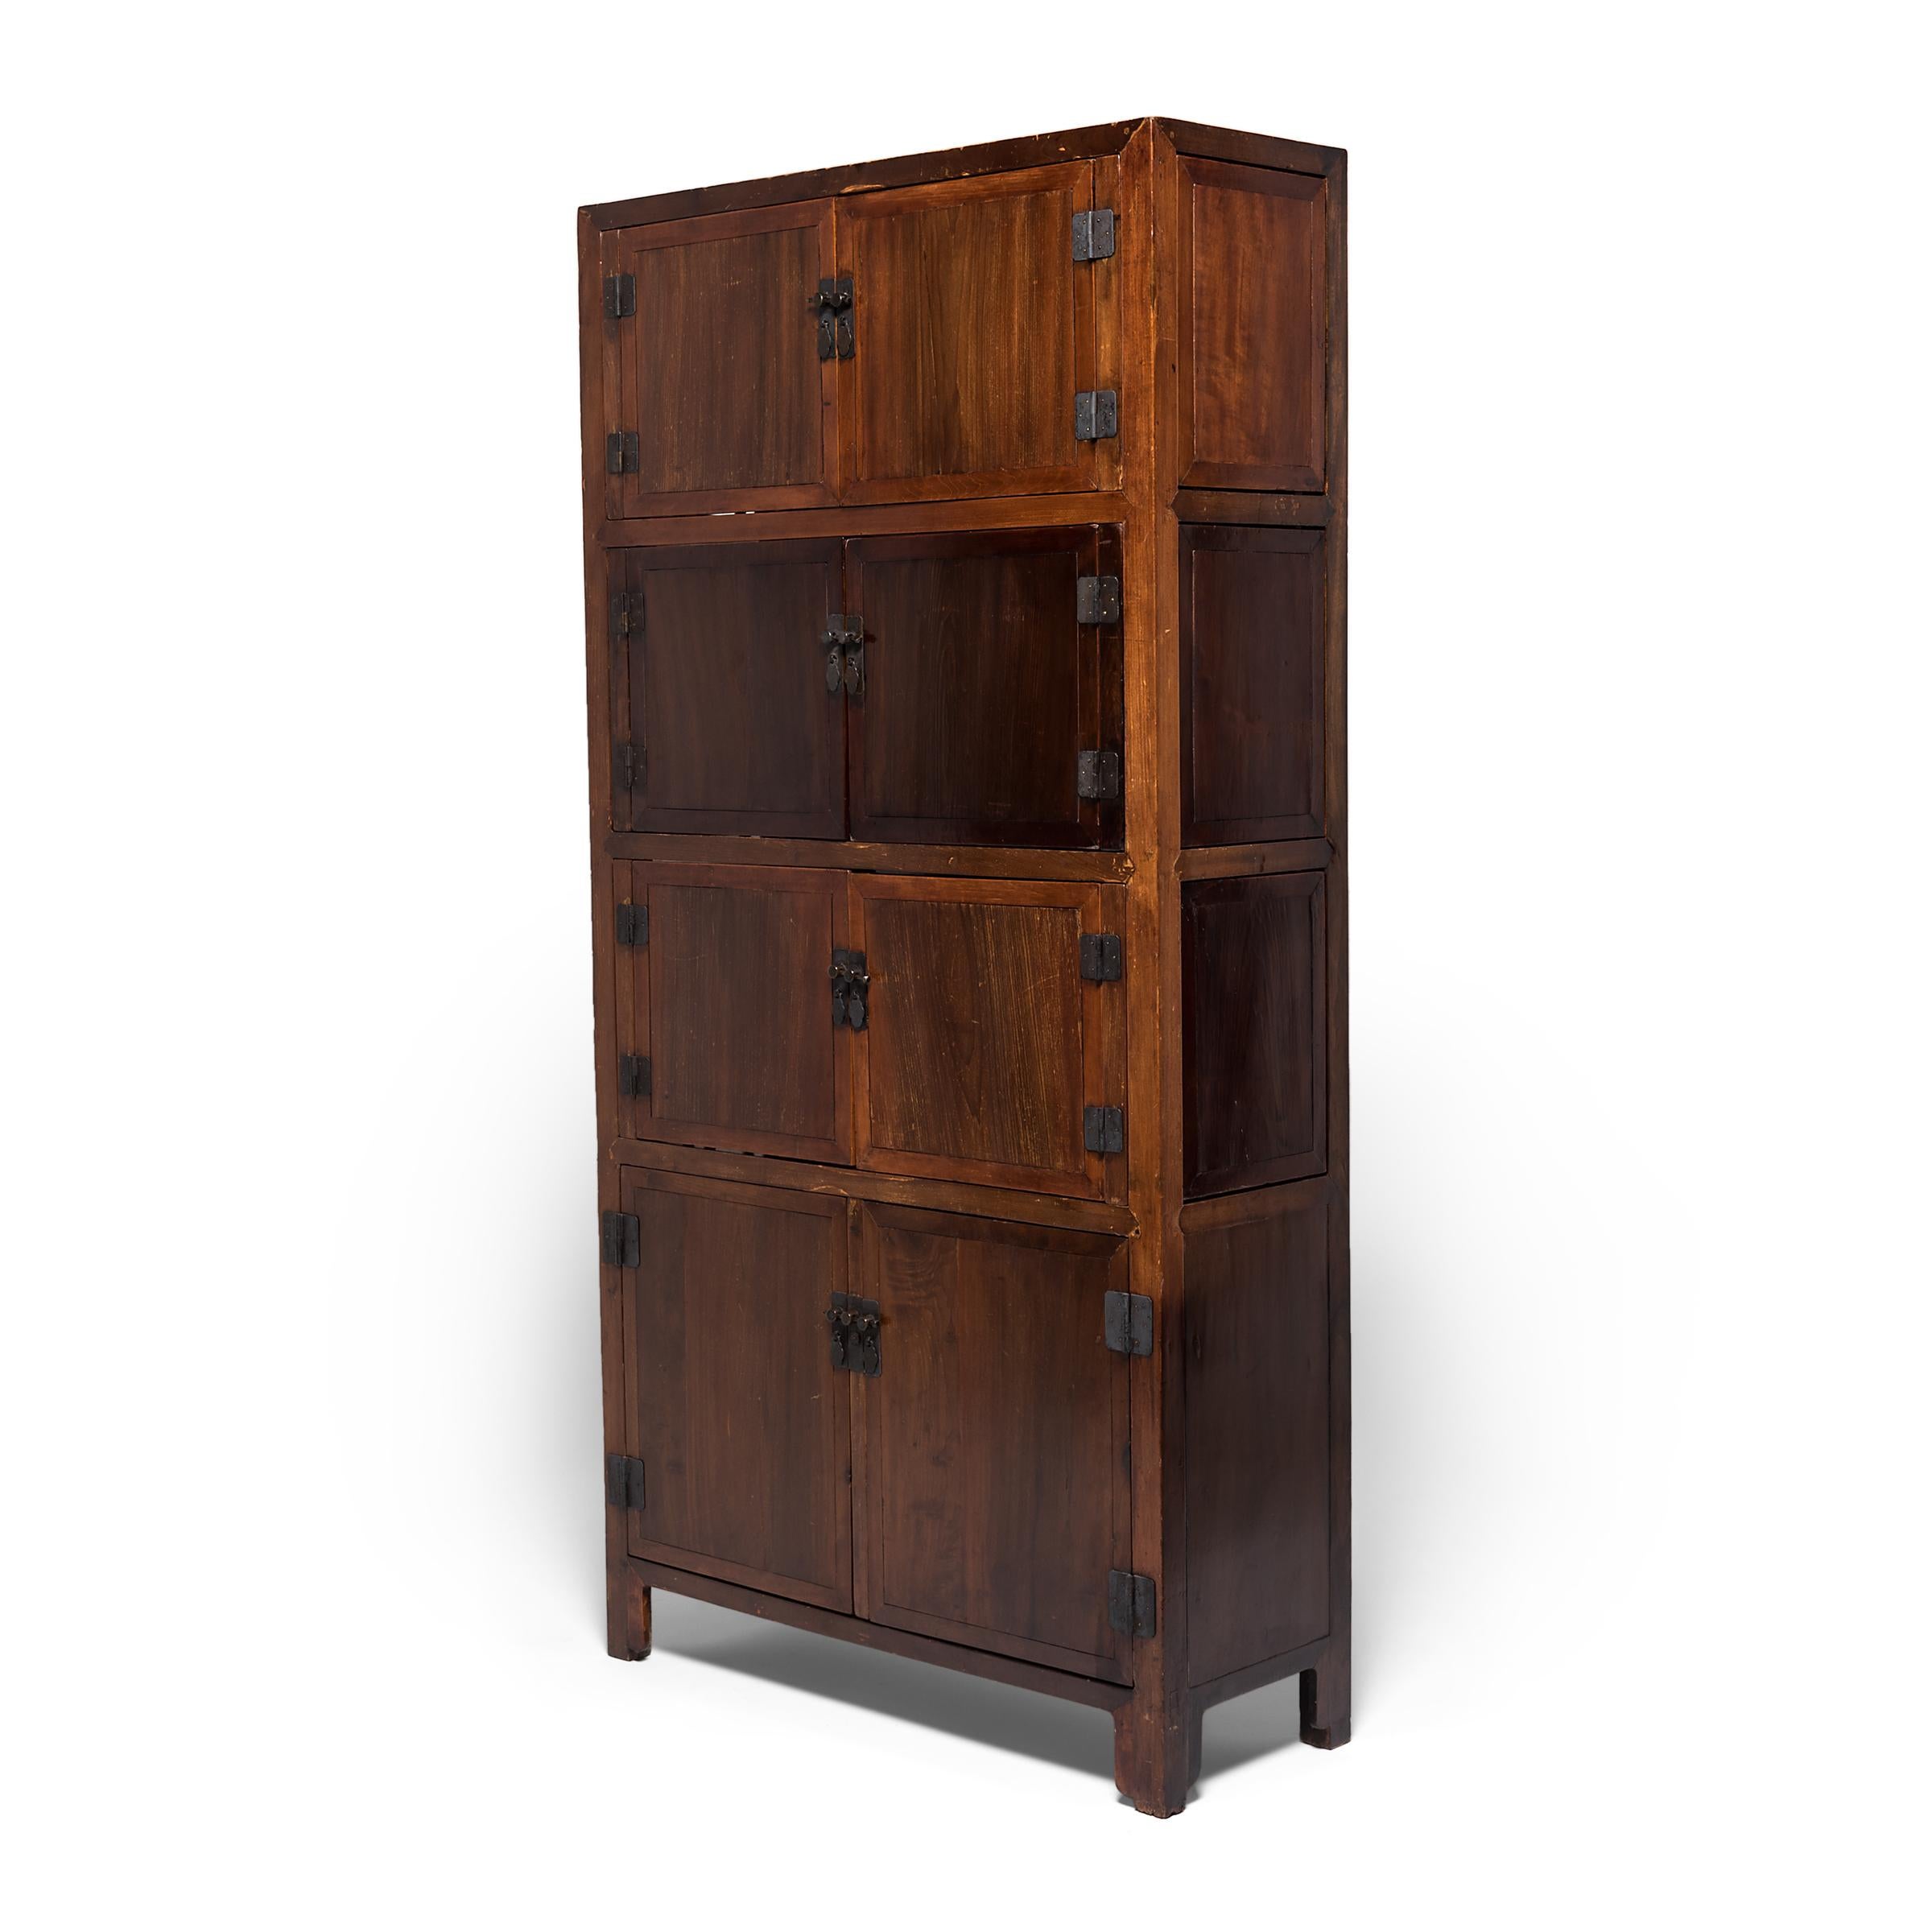 Qing Chinese Convertible Cedar Book Cabinet, c. 1850